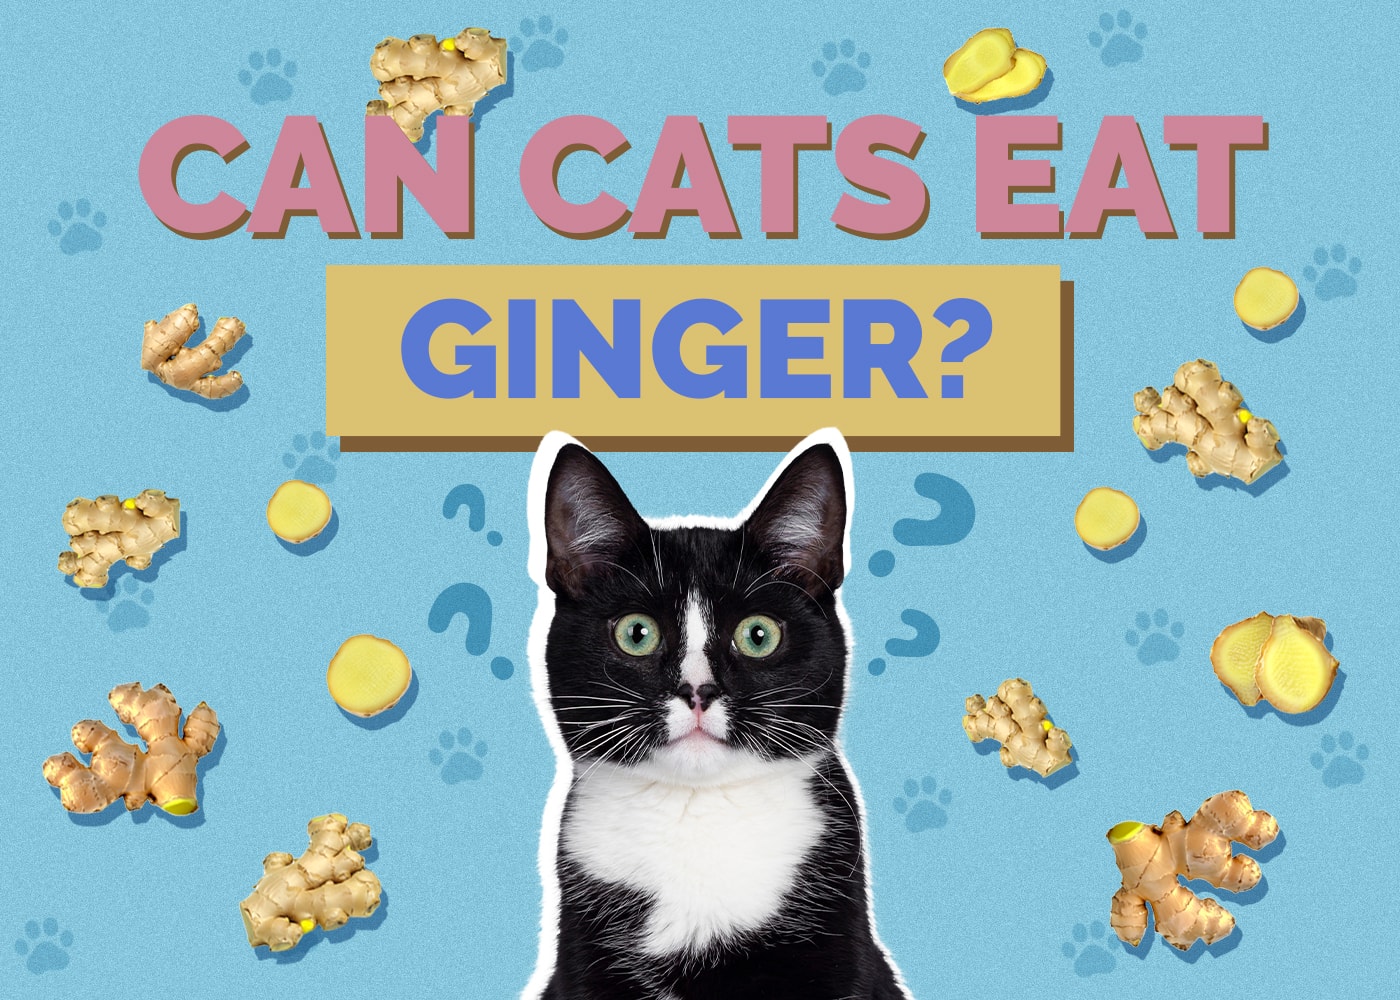 Can Cats Eat ginger